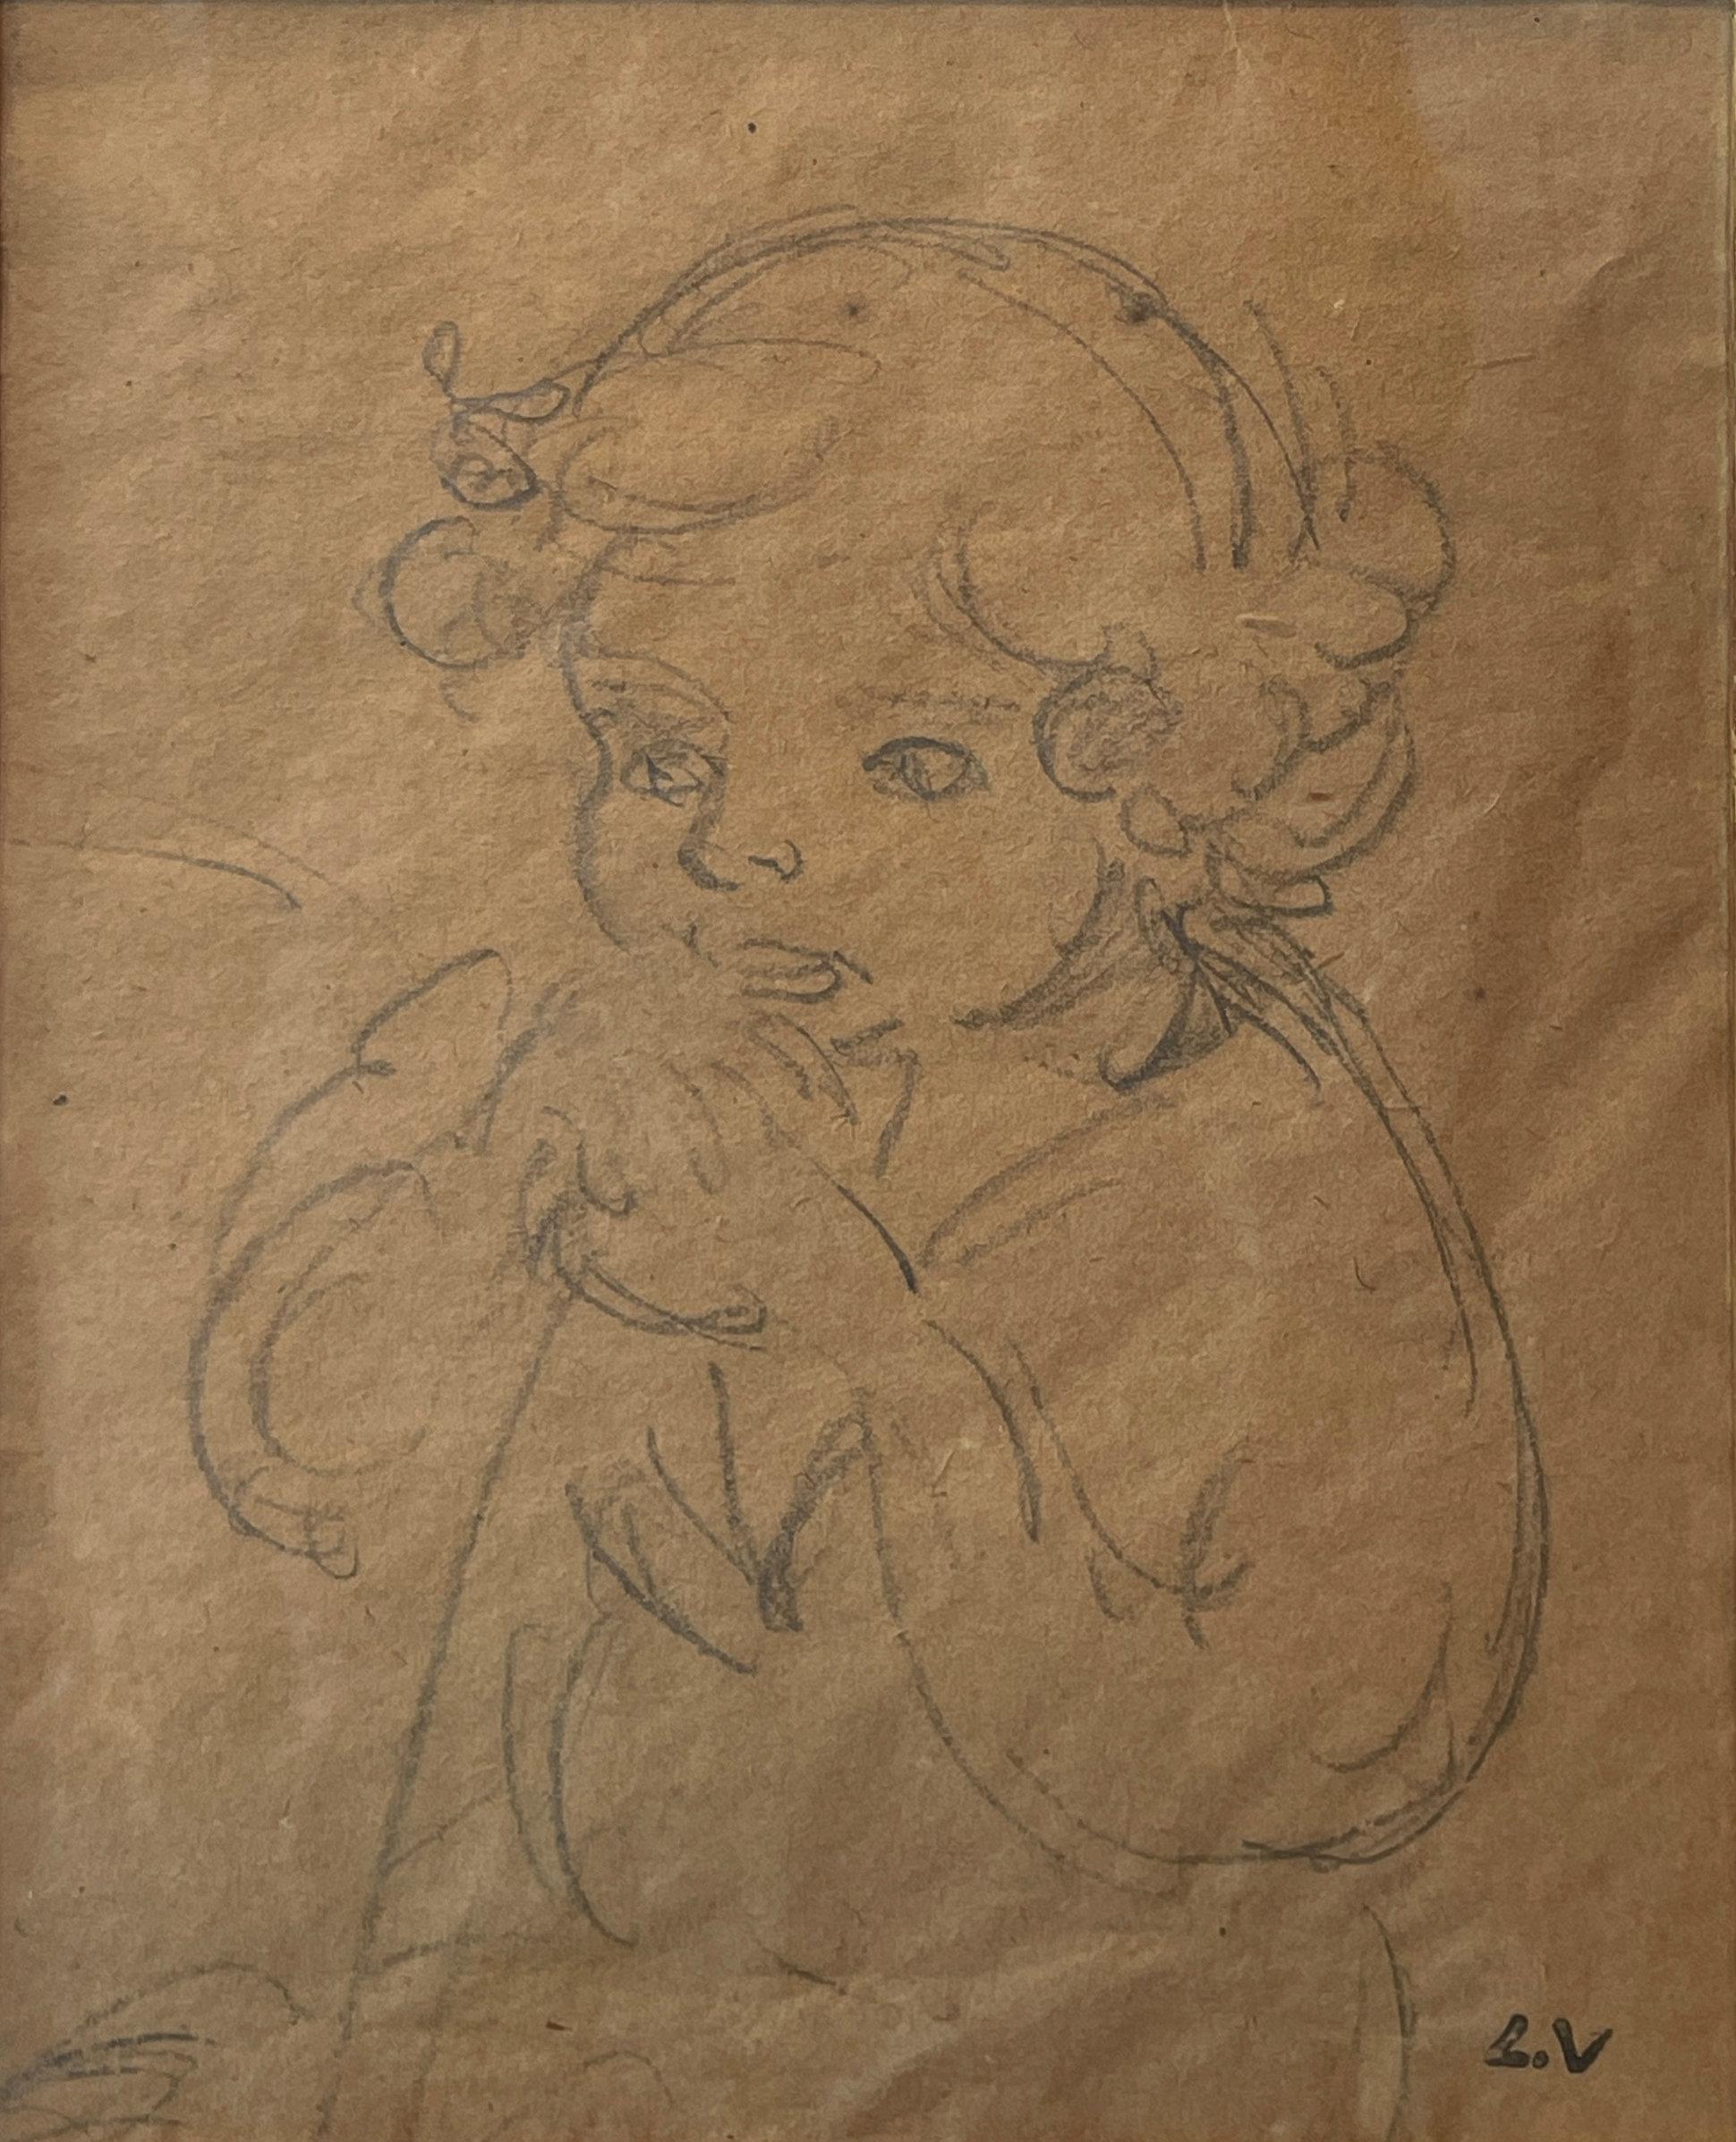 Louis Valtat
Young Girl
Stamped with initials lower right
Pencil on brown paper
Sight 7 x 6 inches

Provenance:
Mrs. Ernest M. Werner, New York
Private Collection, Rhode Island

Louise Valtat was a French painter, printmaker and stage designer.  He